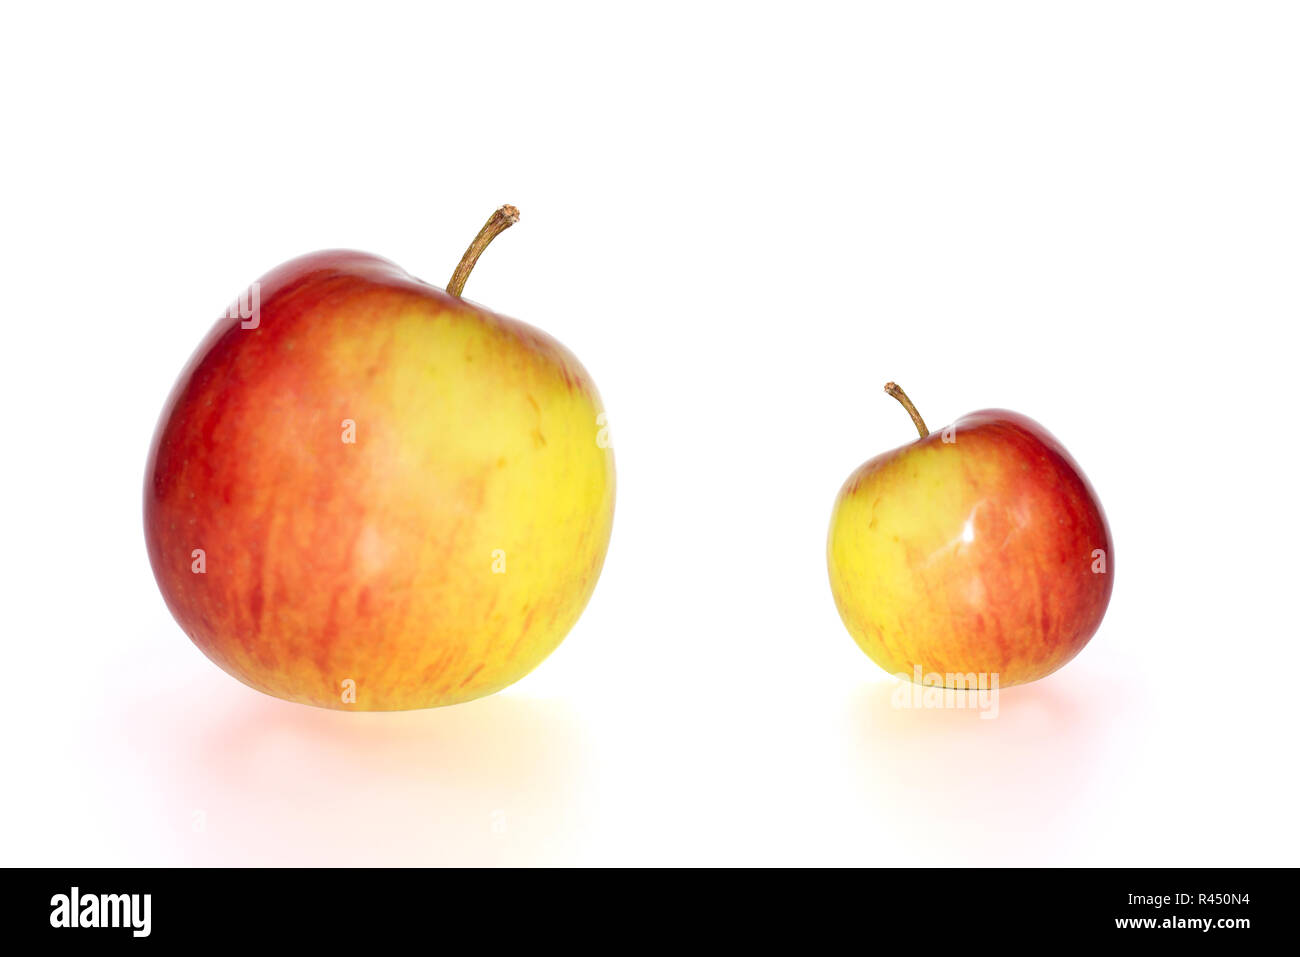 Big and Small Red Apples on White Stock Photo - Image of juicy, large:  22041200